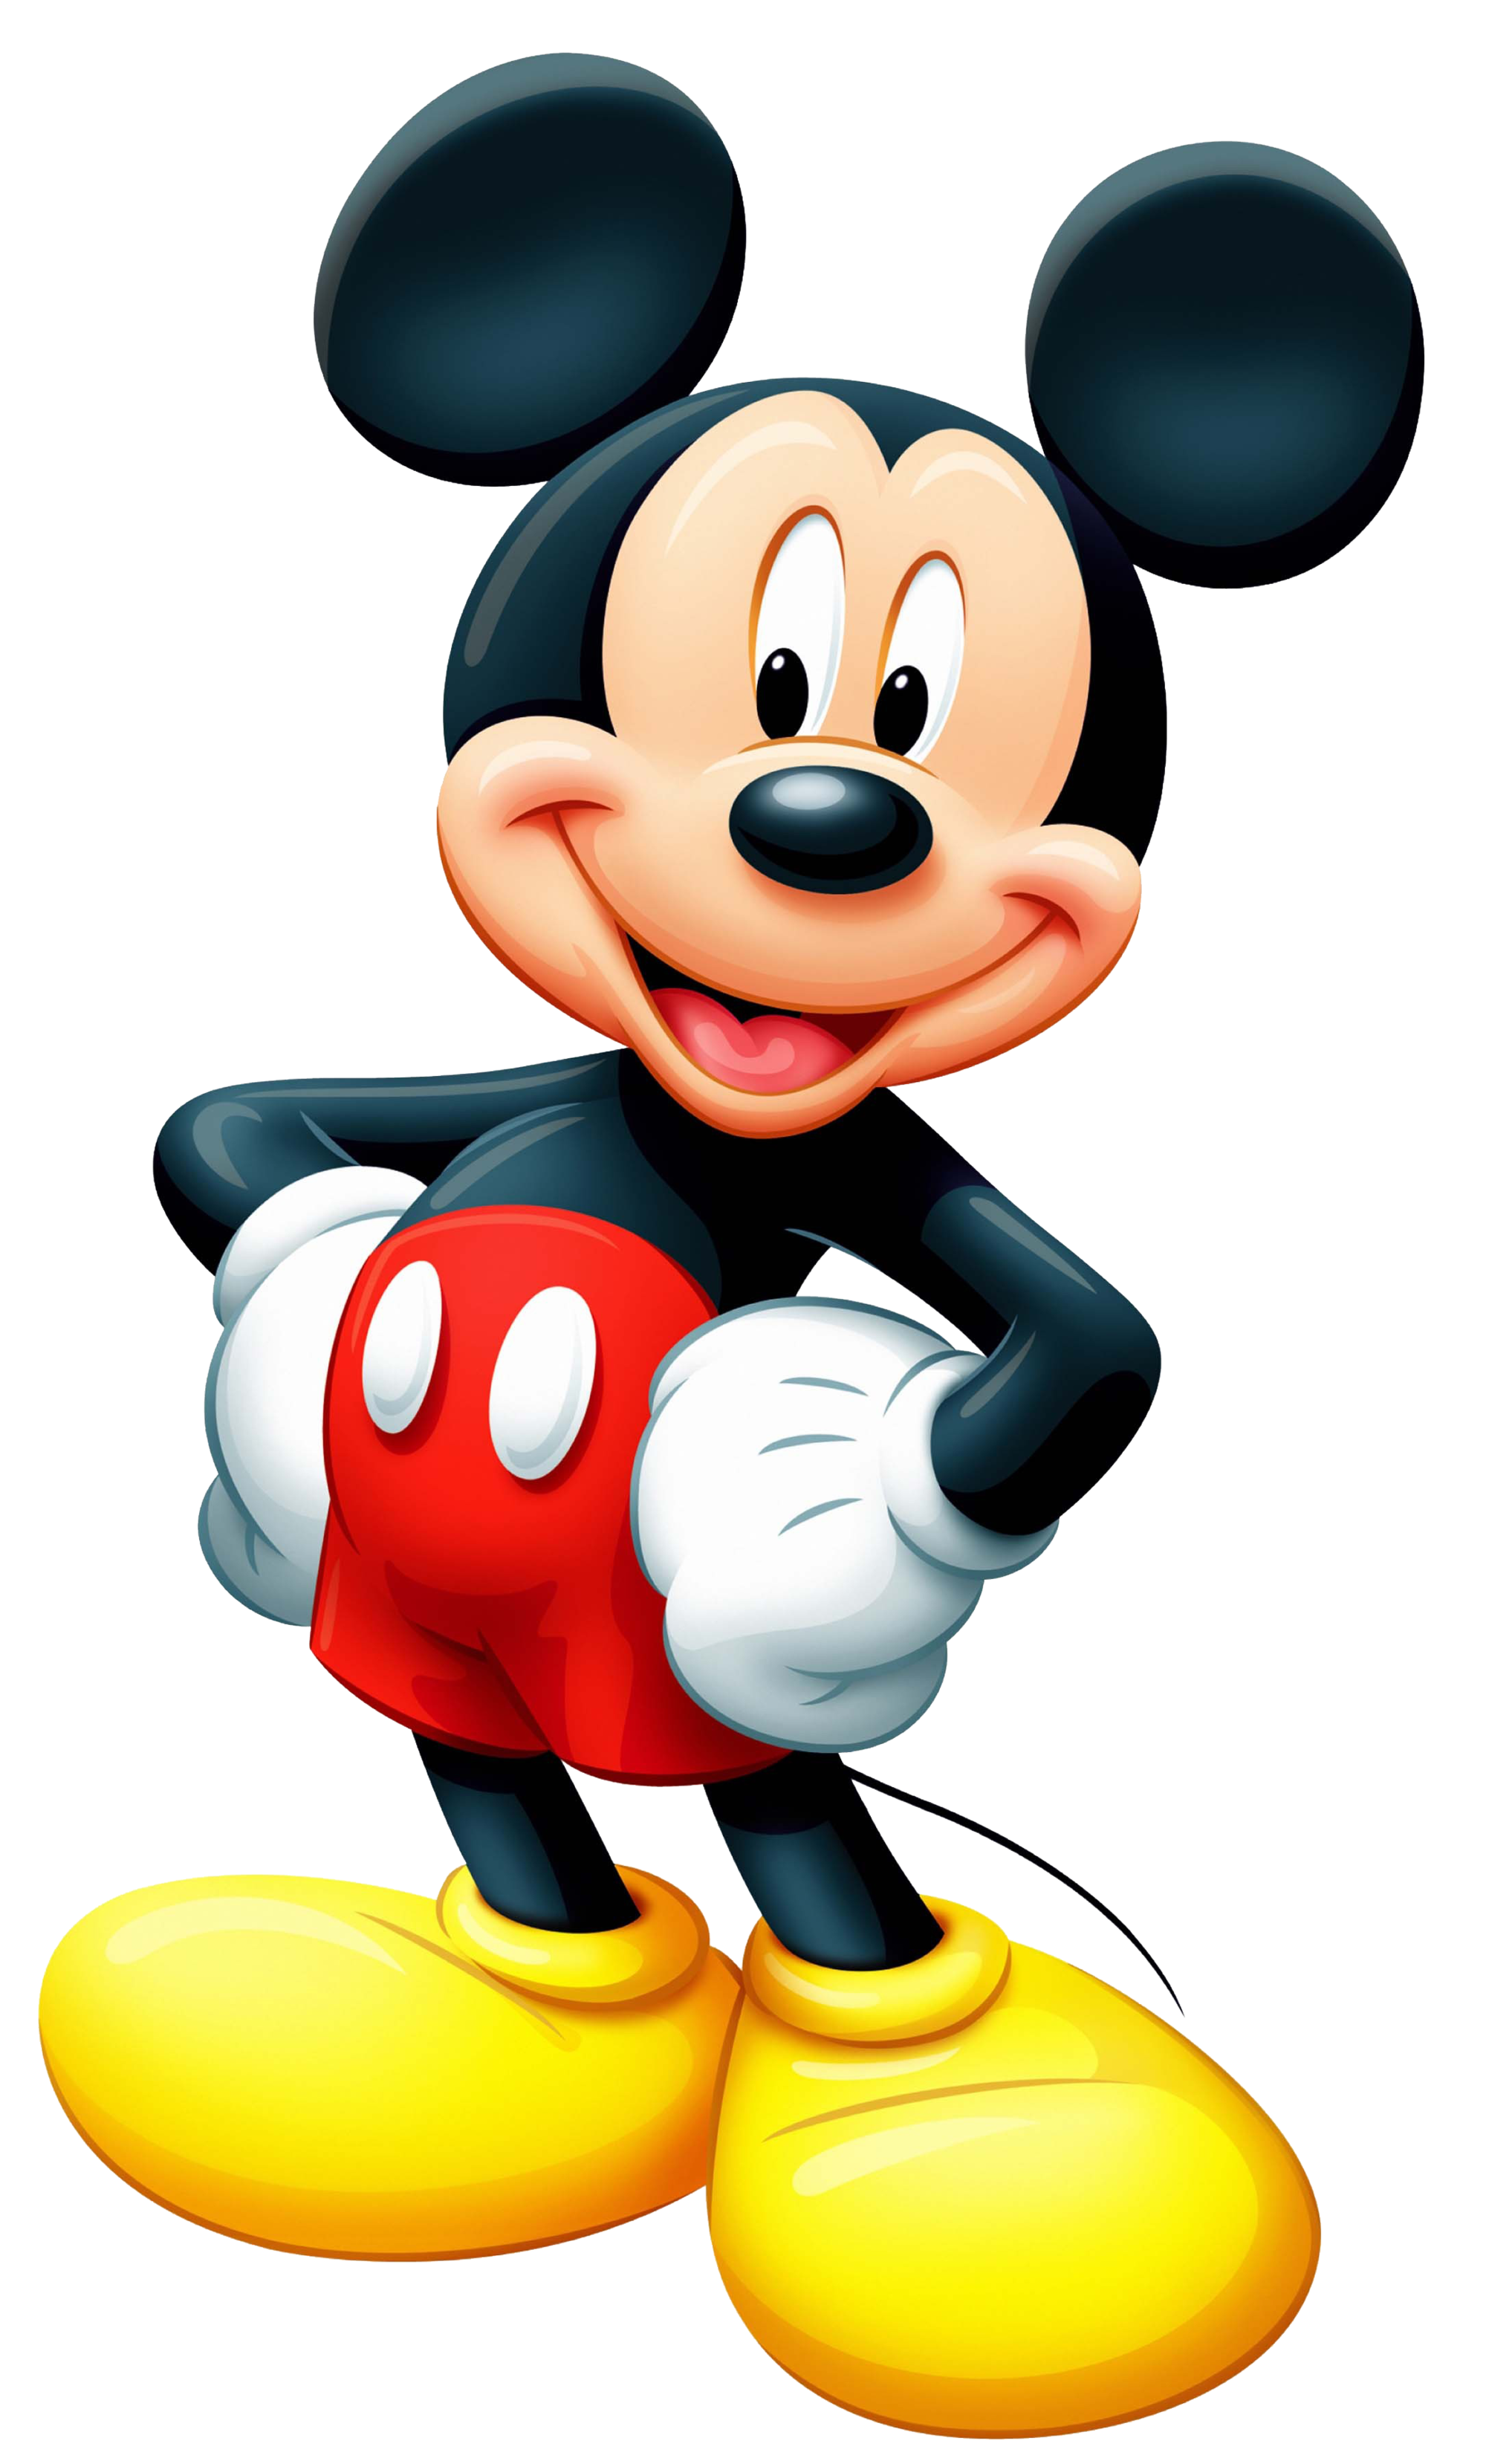 golfer clipart mickey mouse